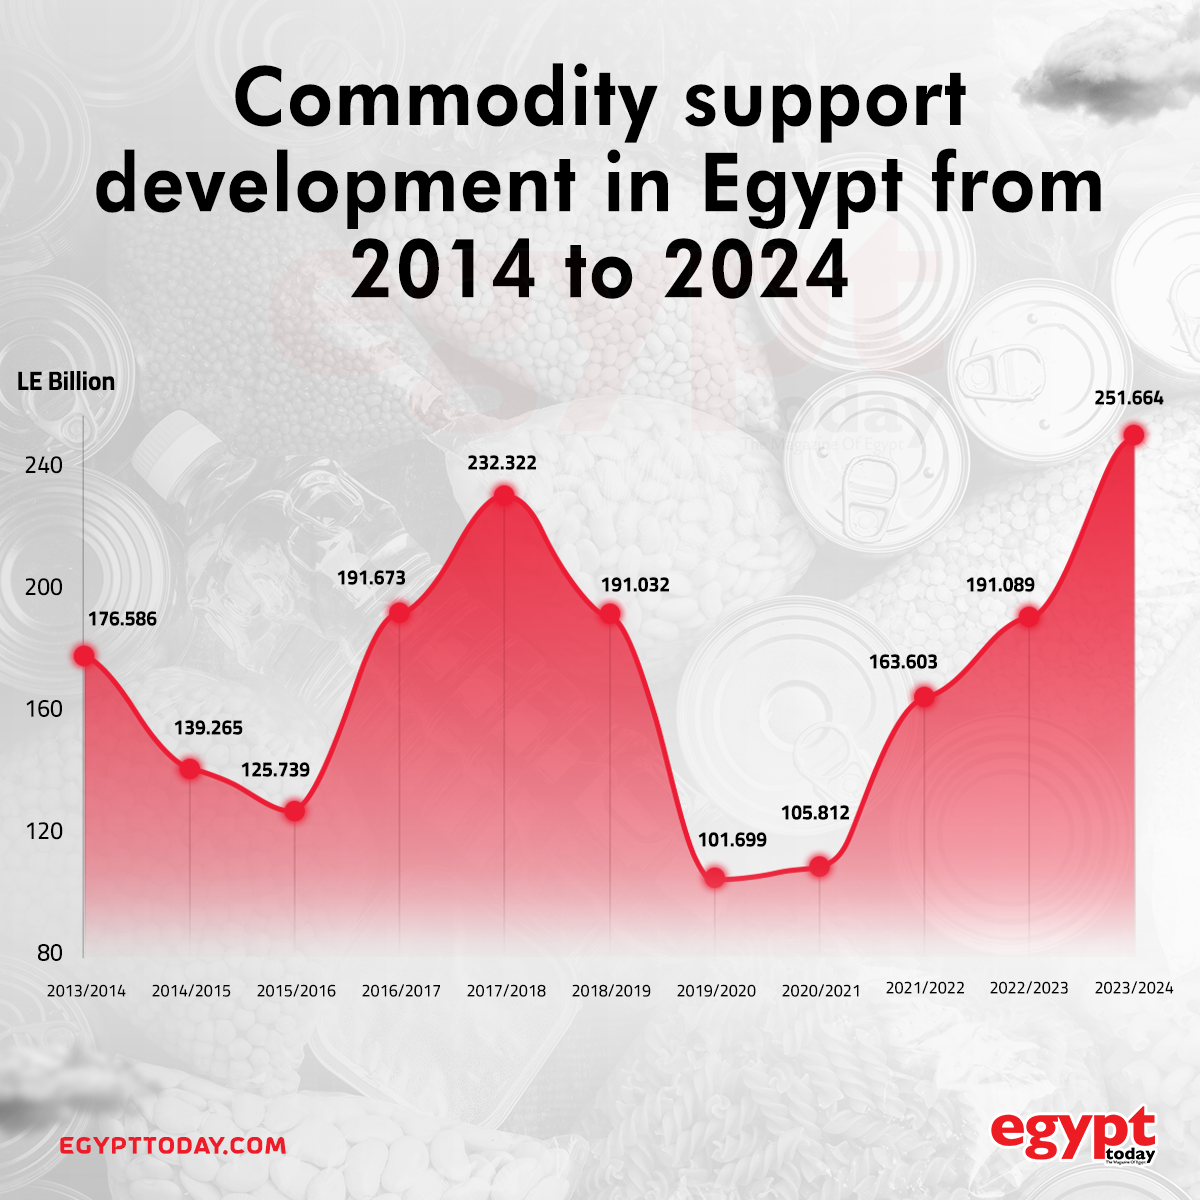 Commodity support development in Egypt from 2014 to 2024